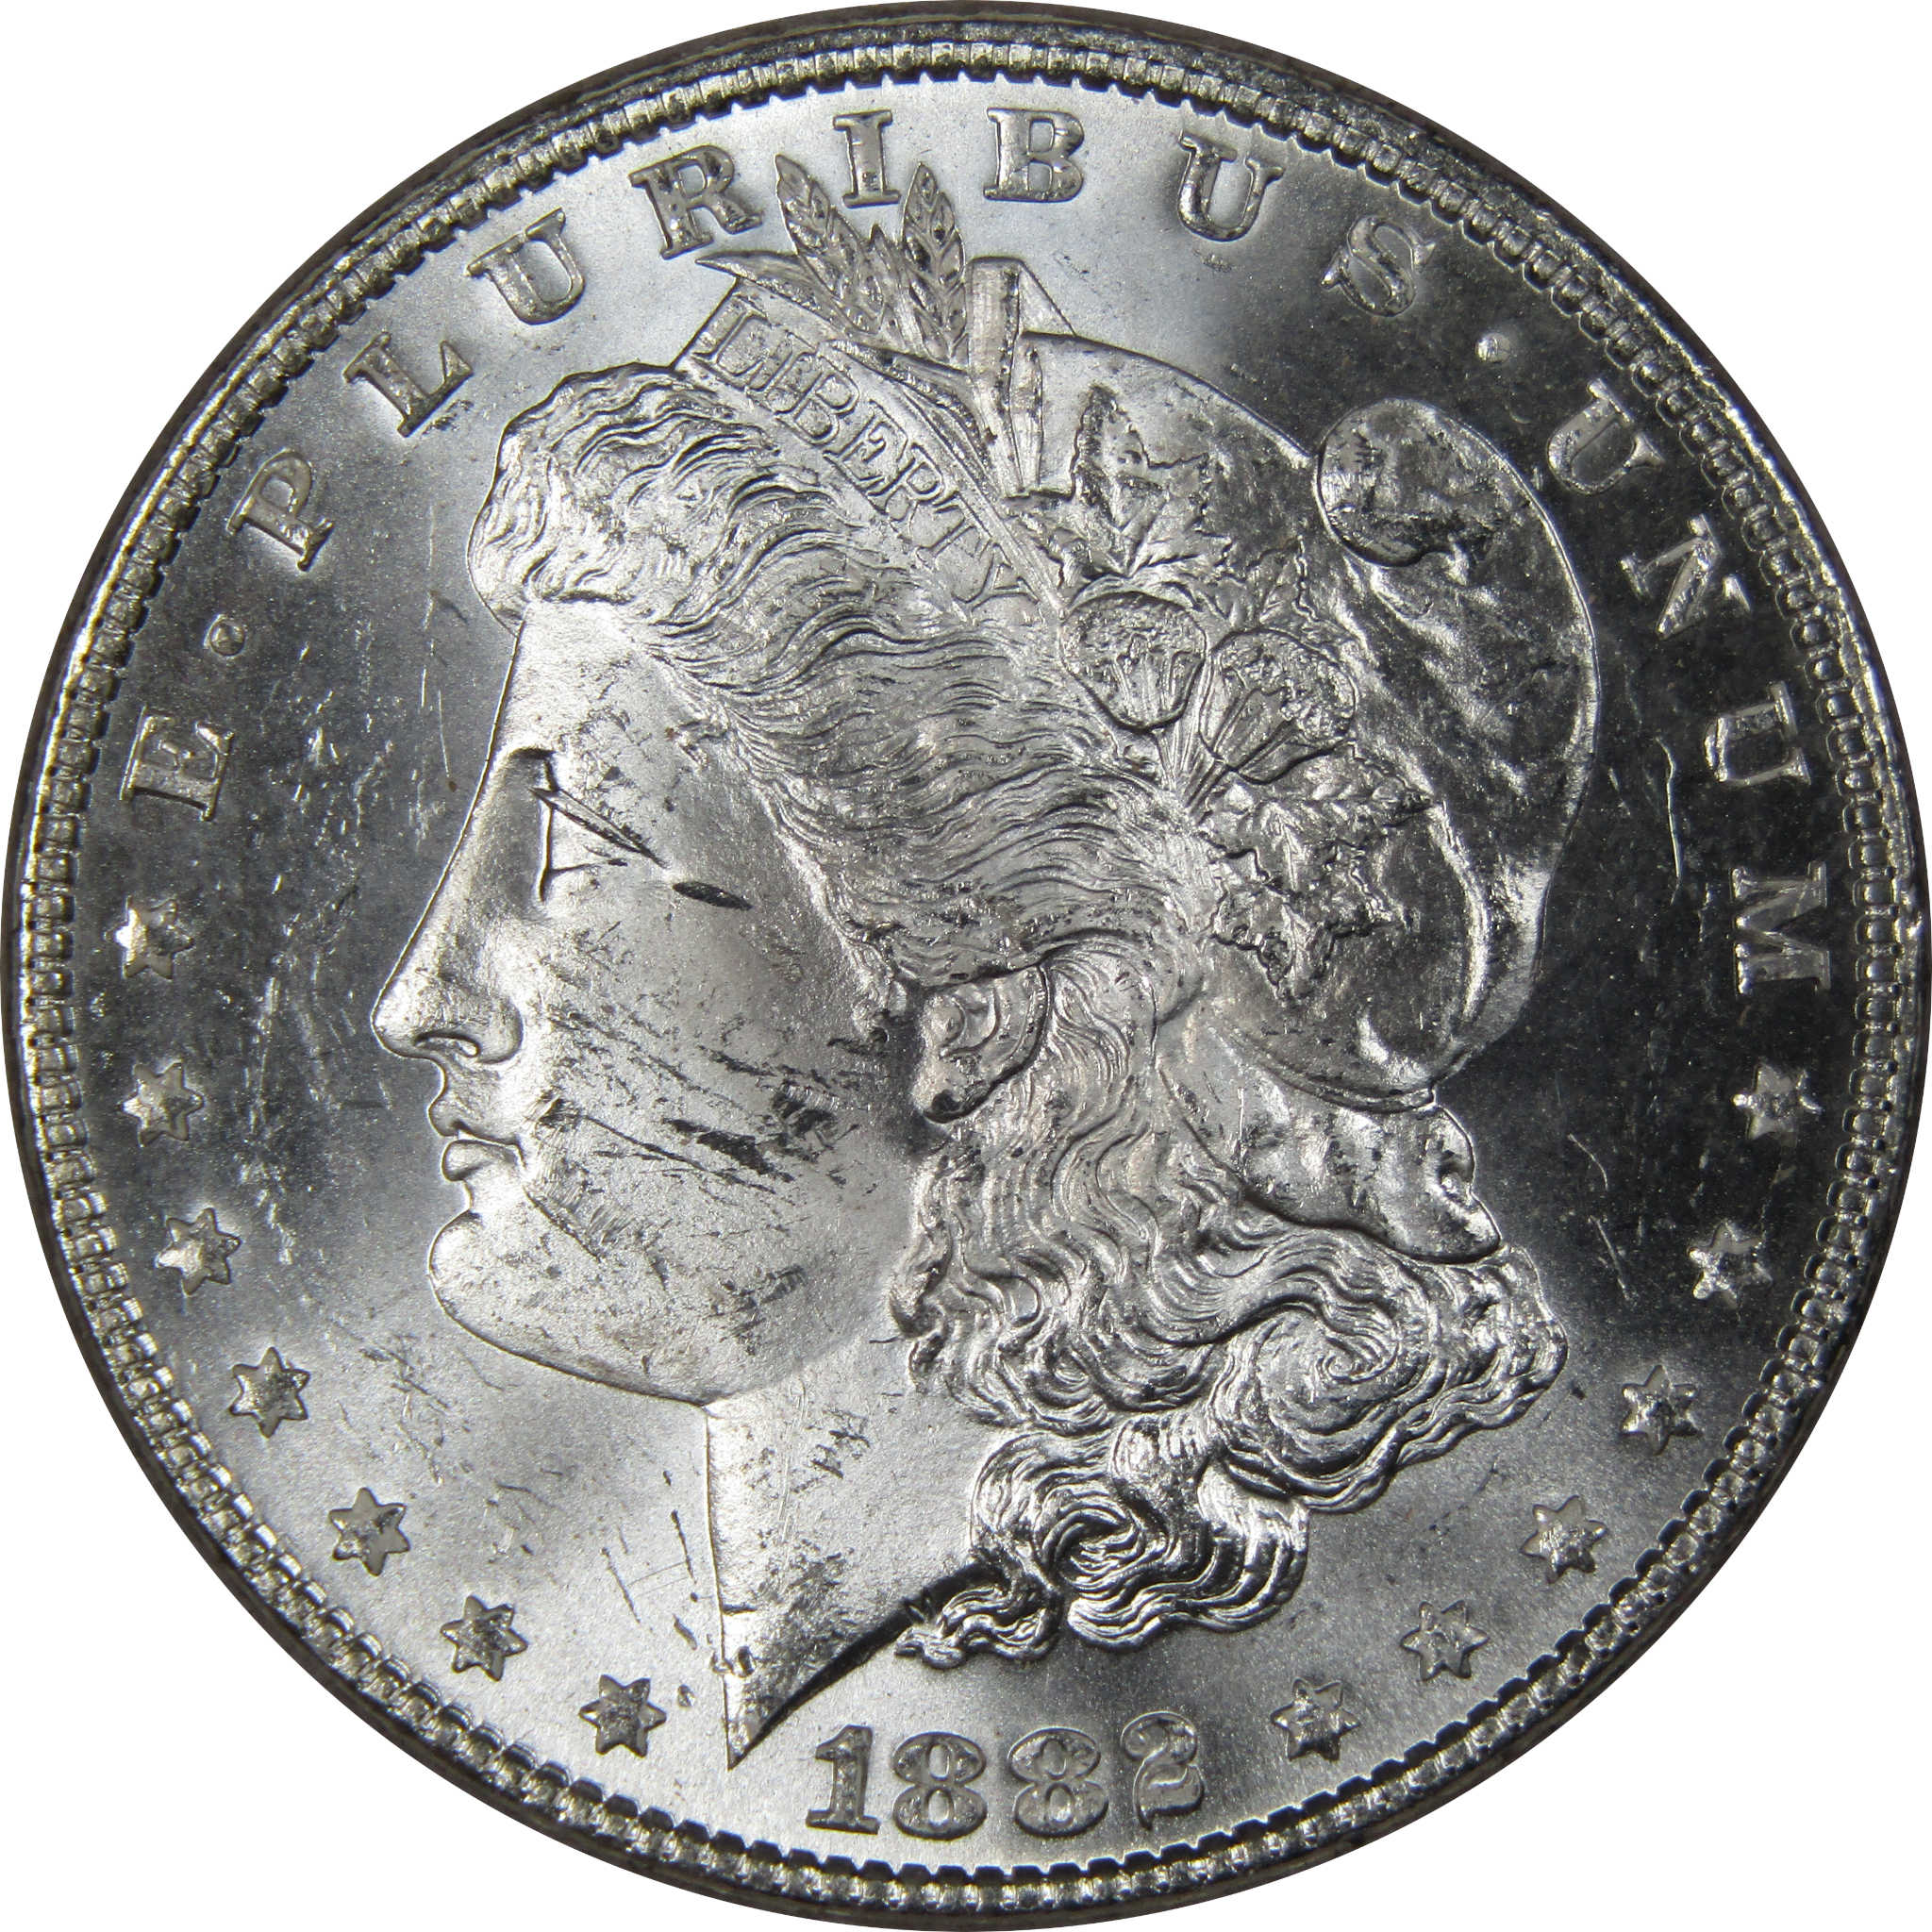 1882 Morgan Dollar BU Uncirculated Mint State 90% Silver SKU:IPC9679 - Morgan coin - Morgan silver dollar - Morgan silver dollar for sale - Profile Coins &amp; Collectibles